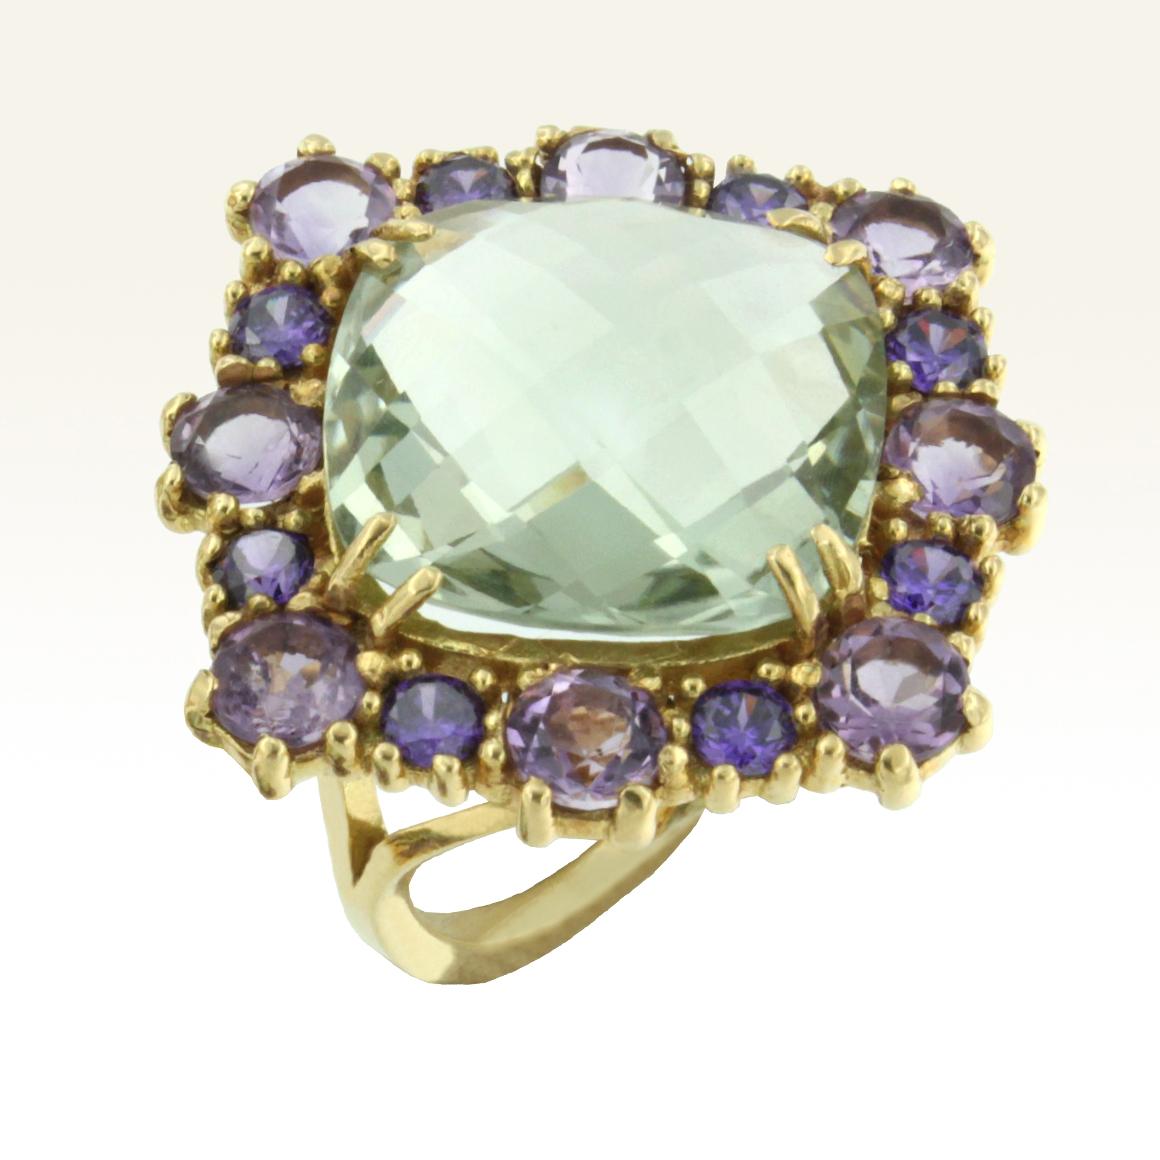 Ring in 18k yellow gold with Amethyst (round cut size: 2,50 and 4,50mm) and green Amethyst (square cut, size: 16x16mm)
Size of ring: EU 16   - USA 8,5  g.11.60
Ring in 18k yellow gold with Amethyst (round cut, size: mm) and Green Amethyst (cut,